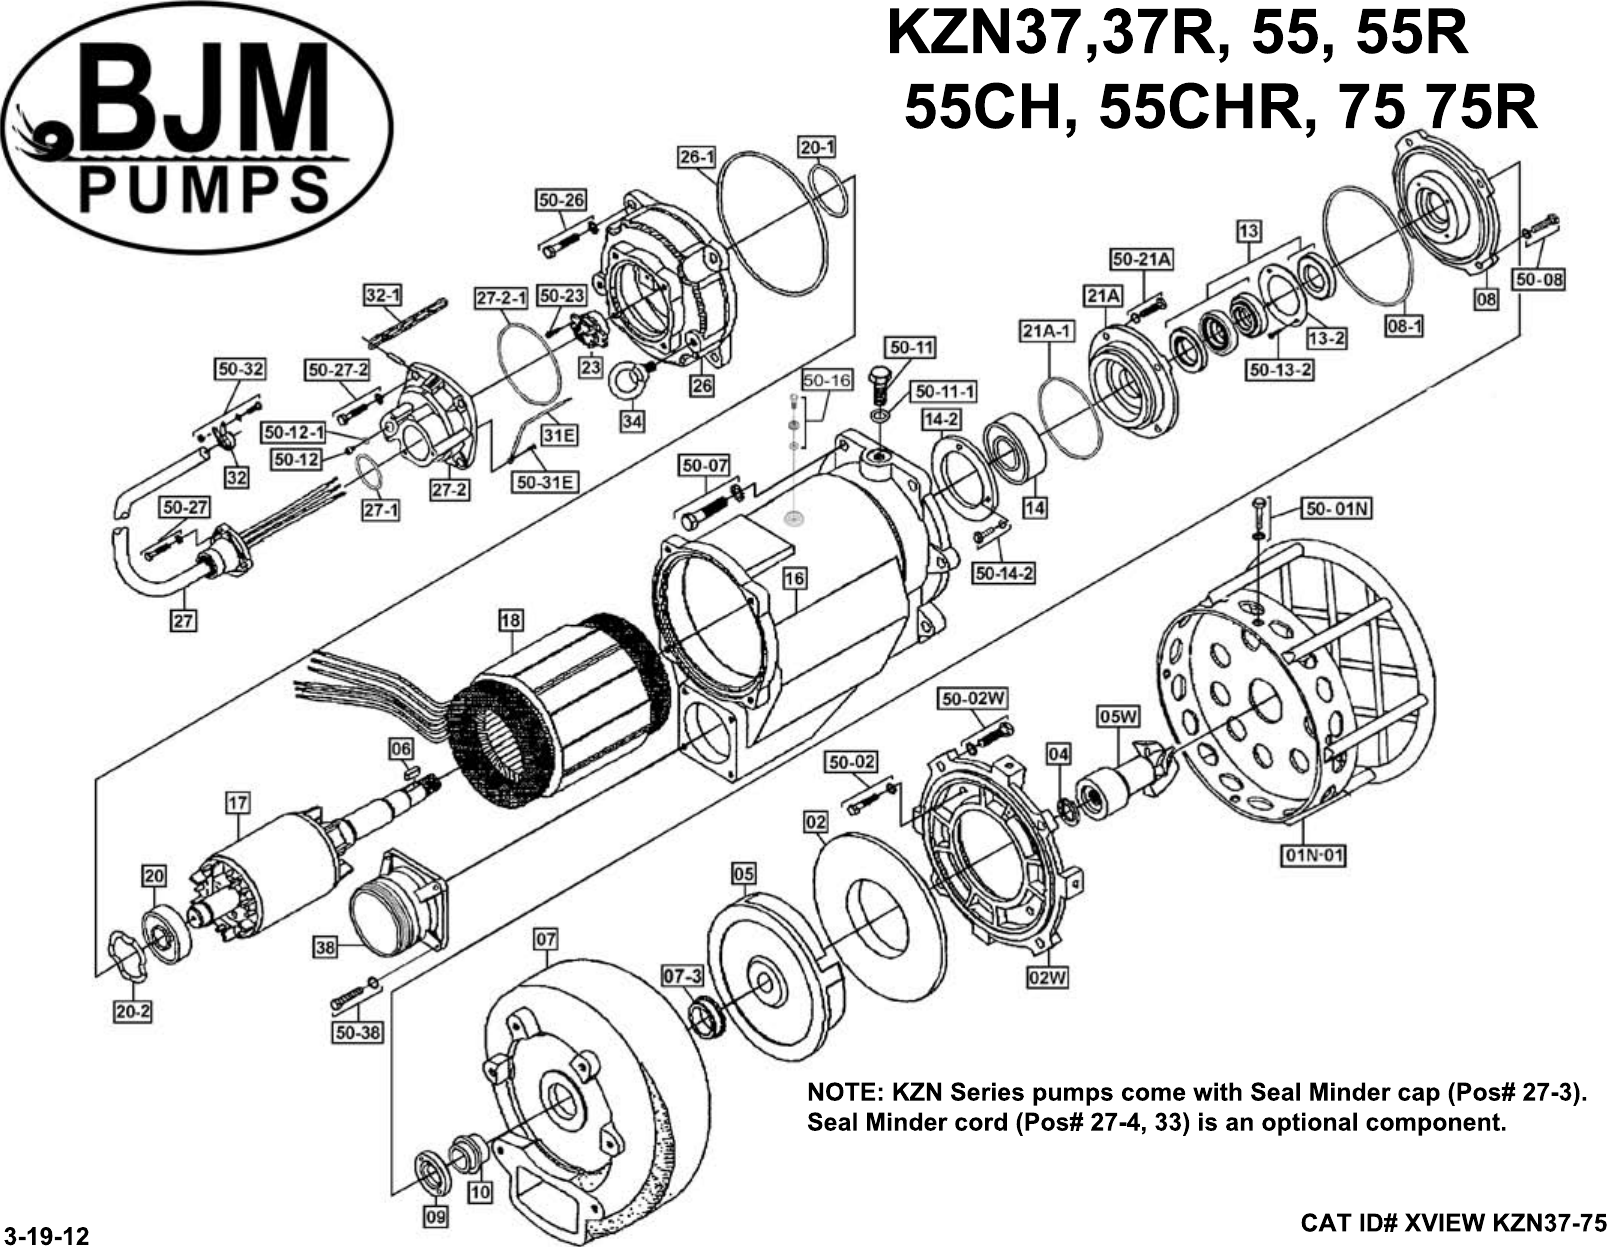 Page 1 of 3 - 136051 5 Bjm Kznr Exploded View User Manual